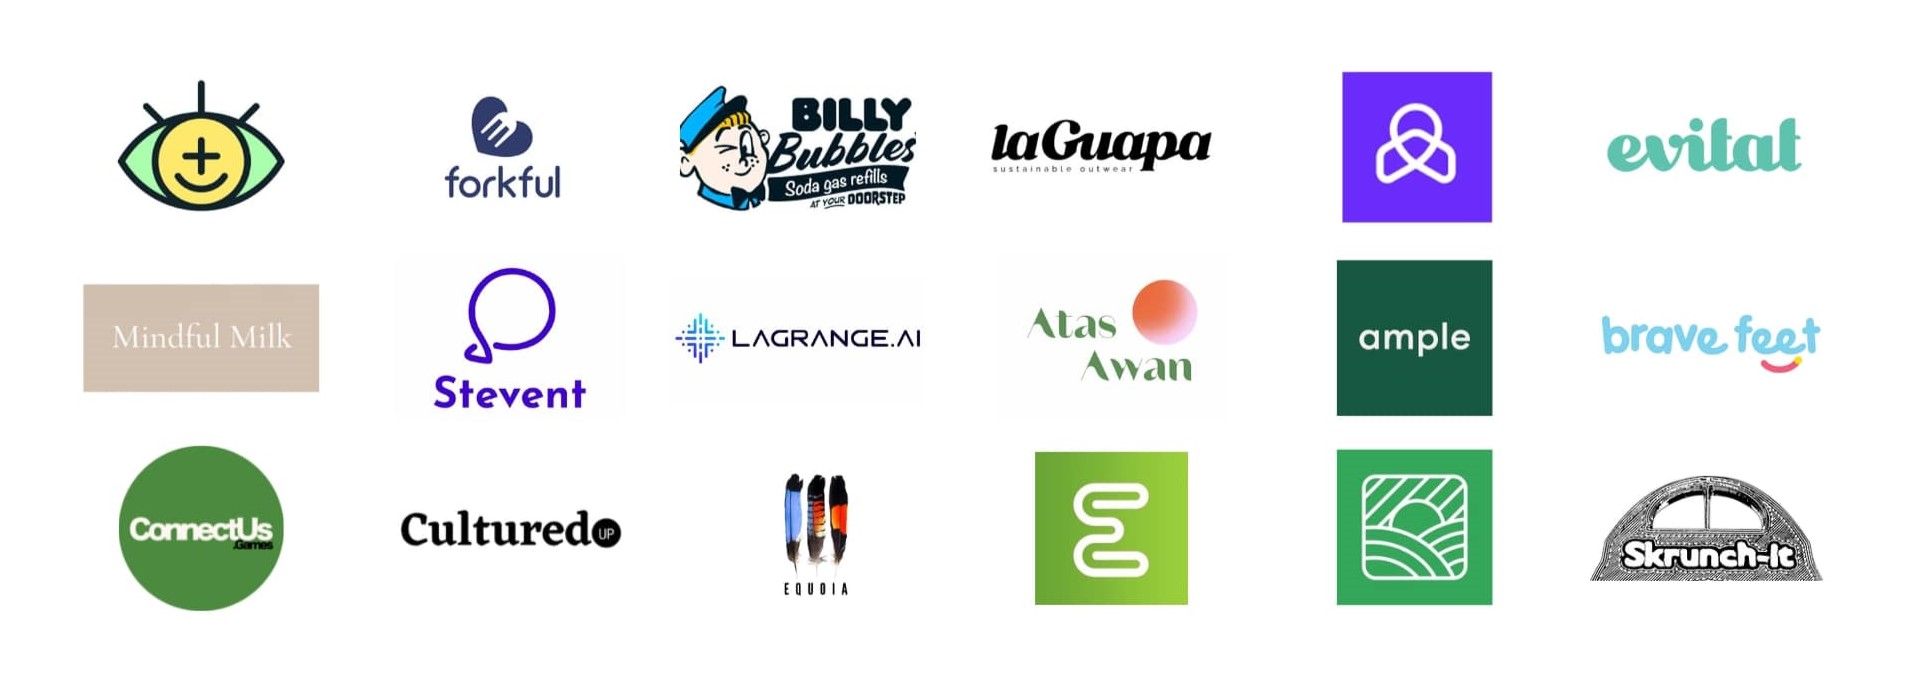 Showcase of various logos created by LaunchHUB's program alumni. There are 18 logos in total arranged in 3 rows of 6 logos each.